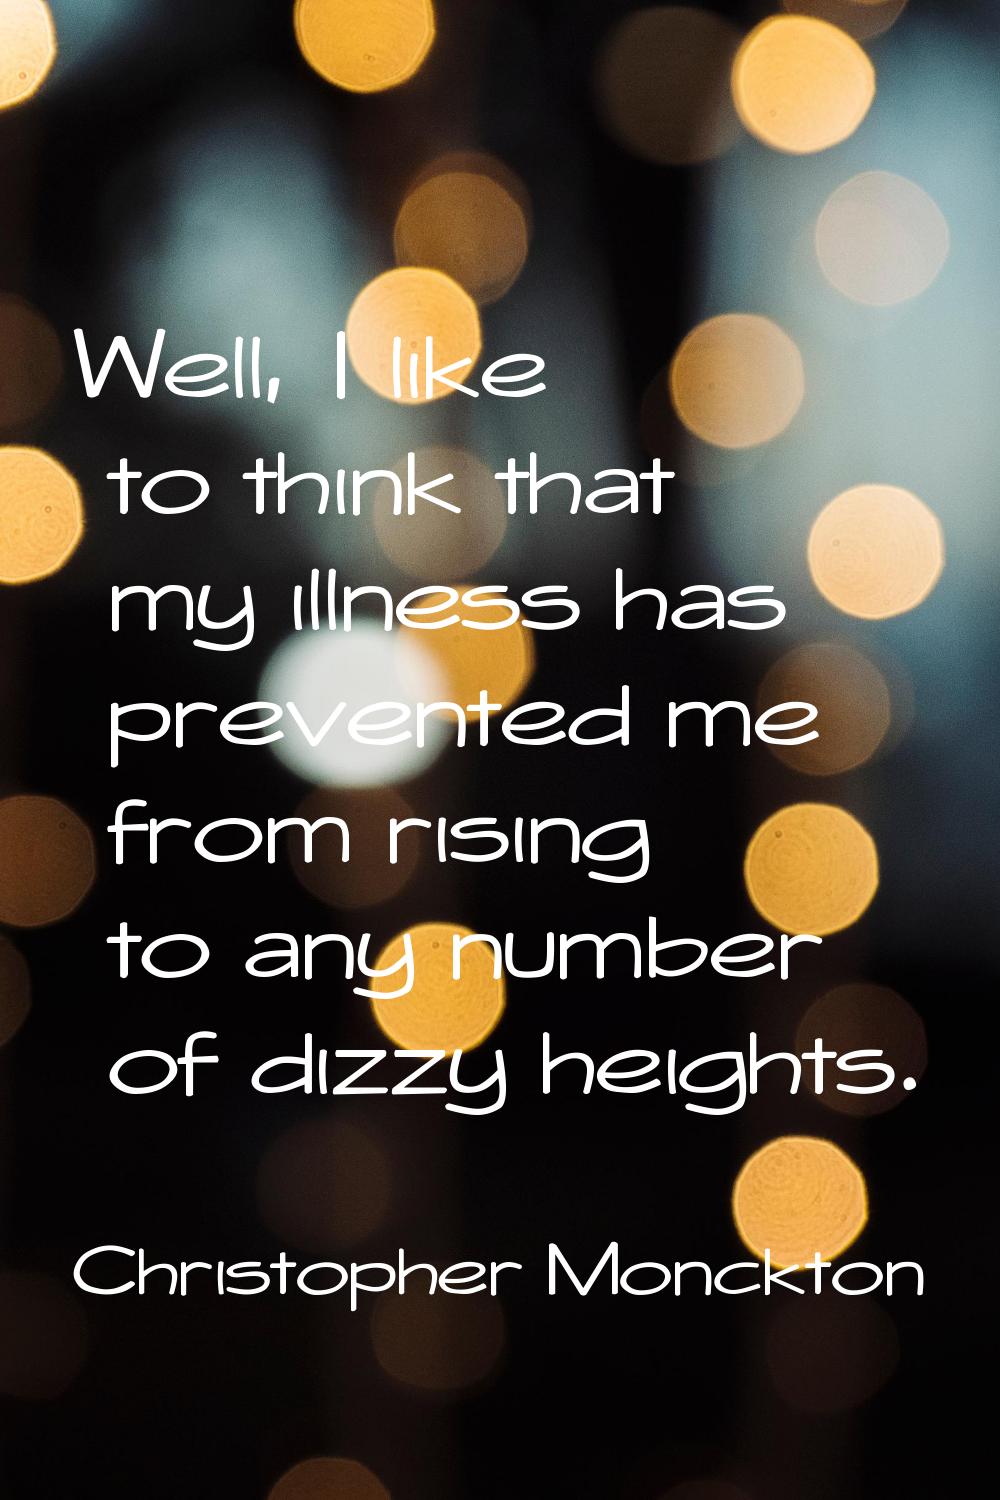 Well, I like to think that my illness has prevented me from rising to any number of dizzy heights.